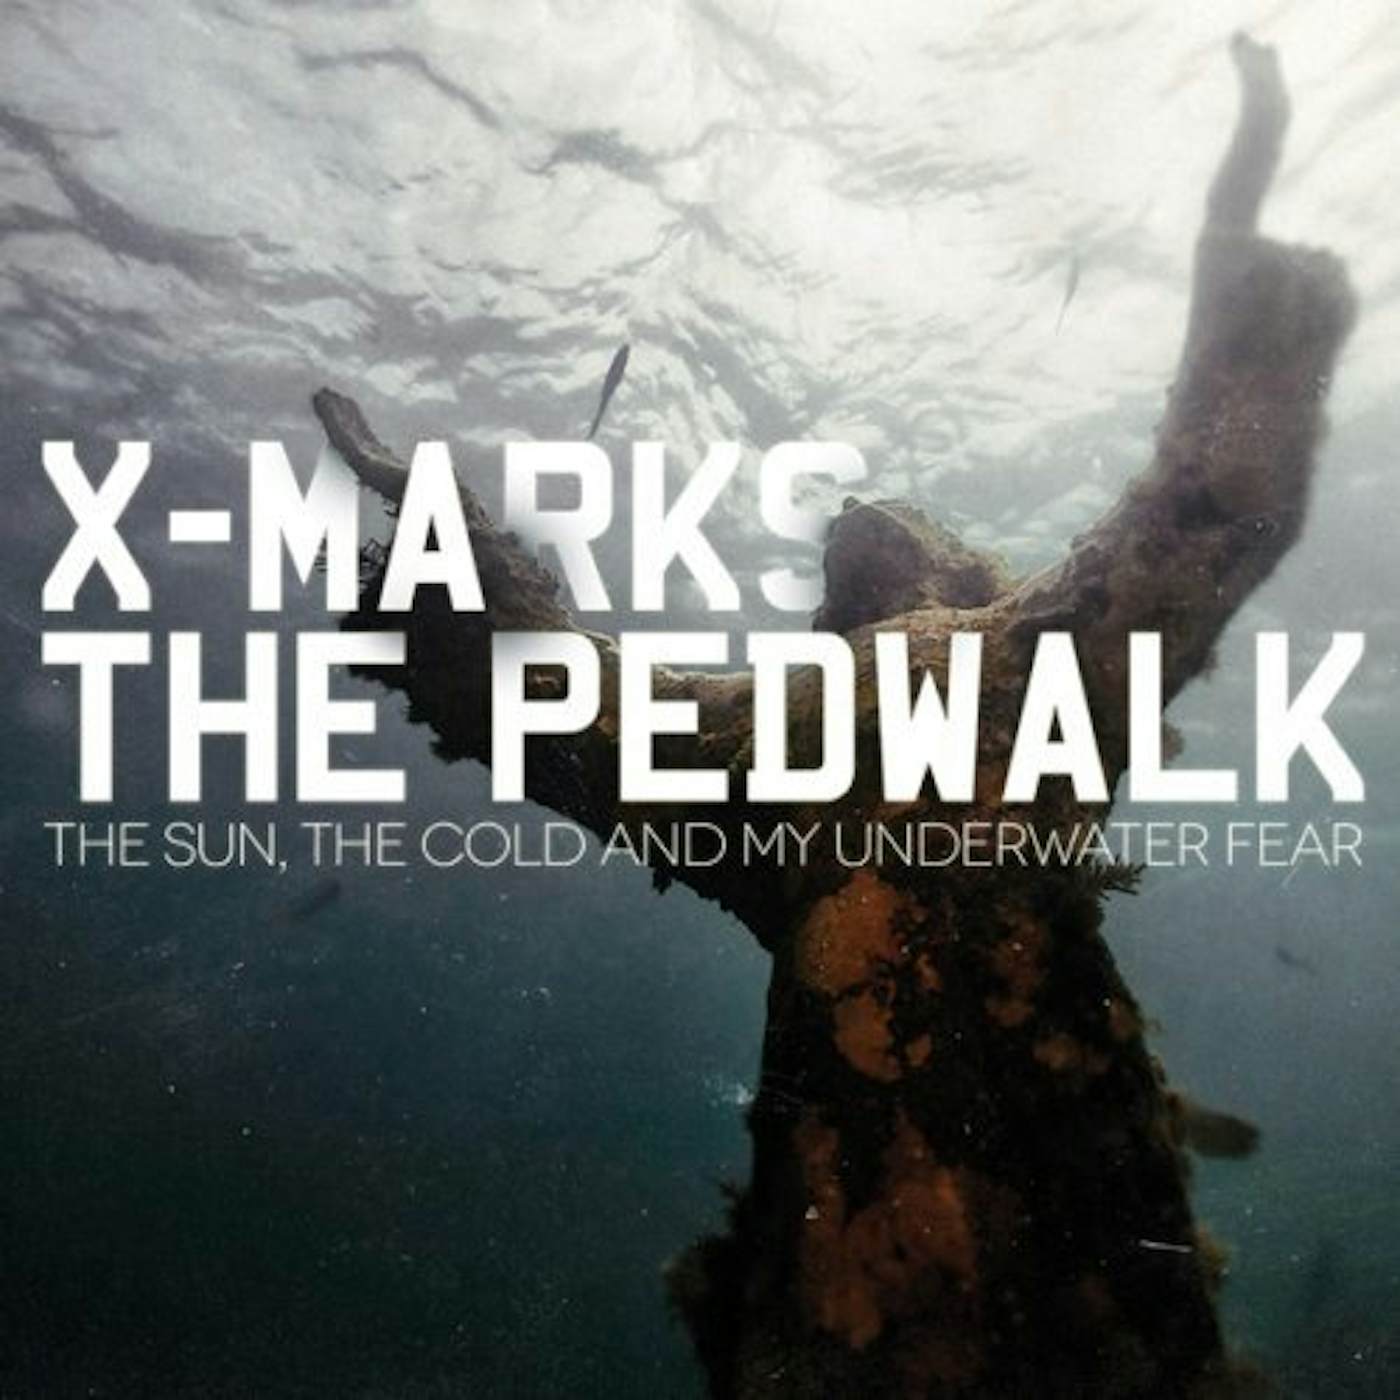 X Marks The Pedwalk SUN THE COLD & MY UNDERWATER FEAR CD